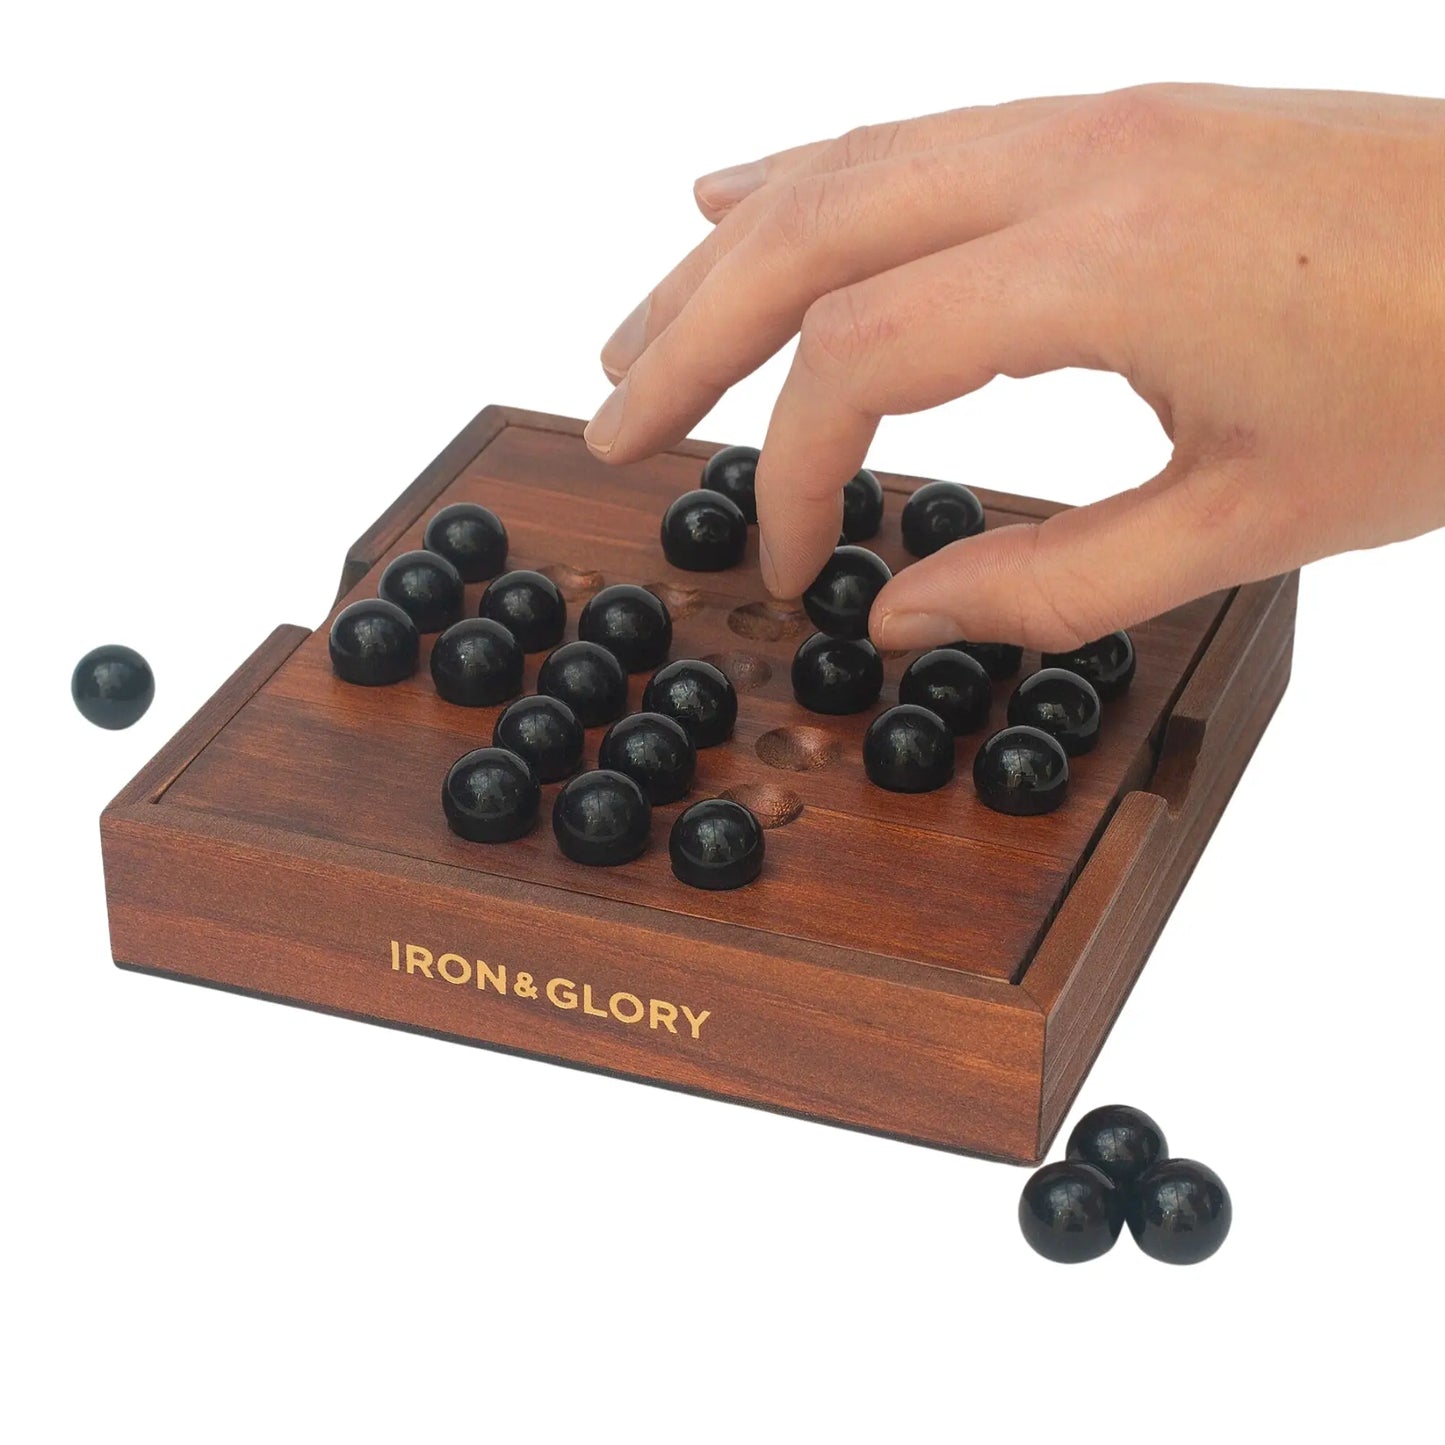 Buy Iron & Glory Solitaire - Deluxe Game Board | Gamess at Woven Durham